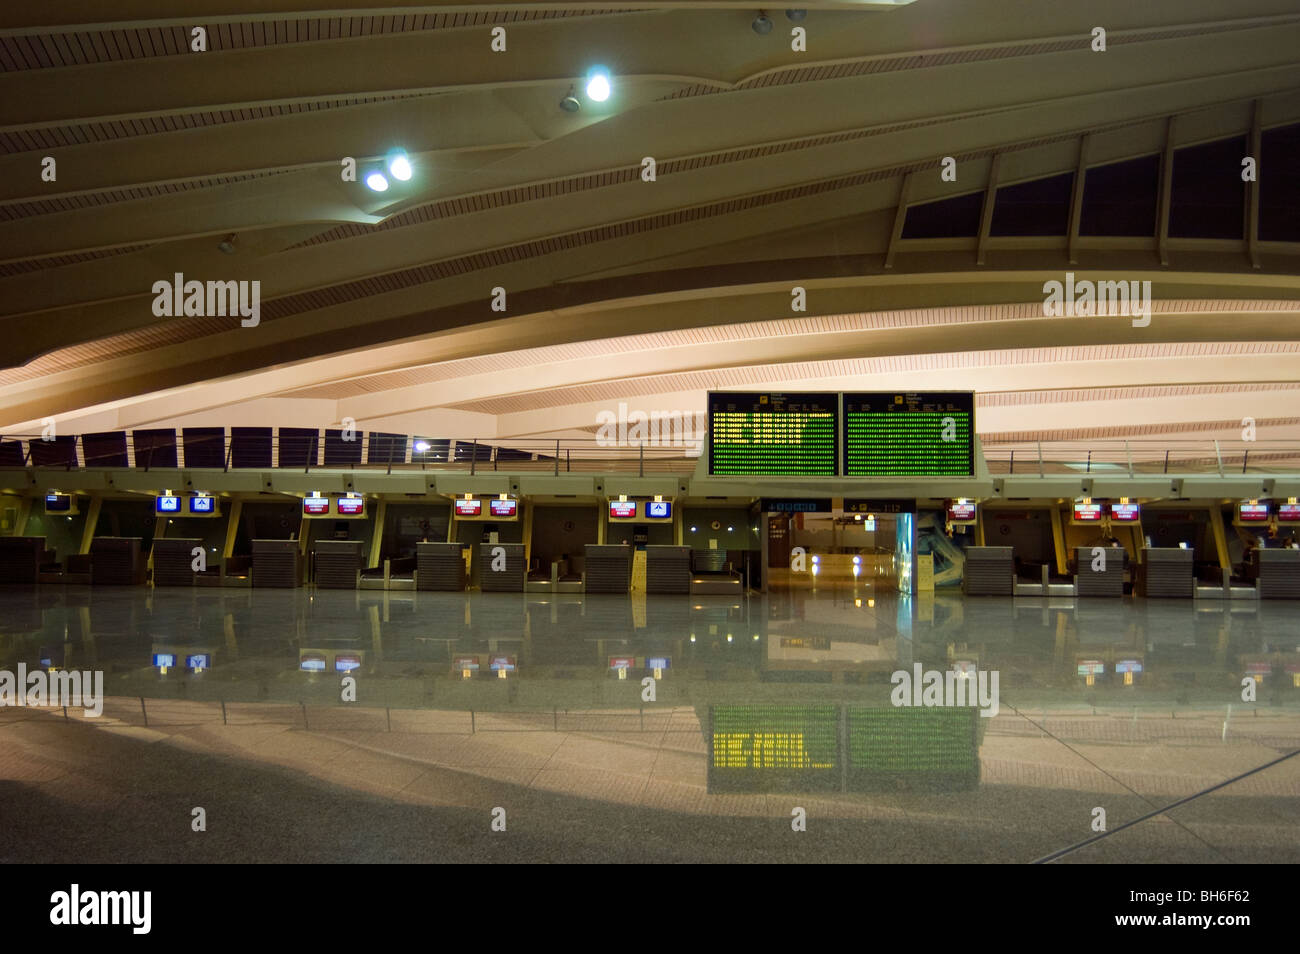 An empty airport concourse with check-in desks.  Bilbao, Spain Stock Photo